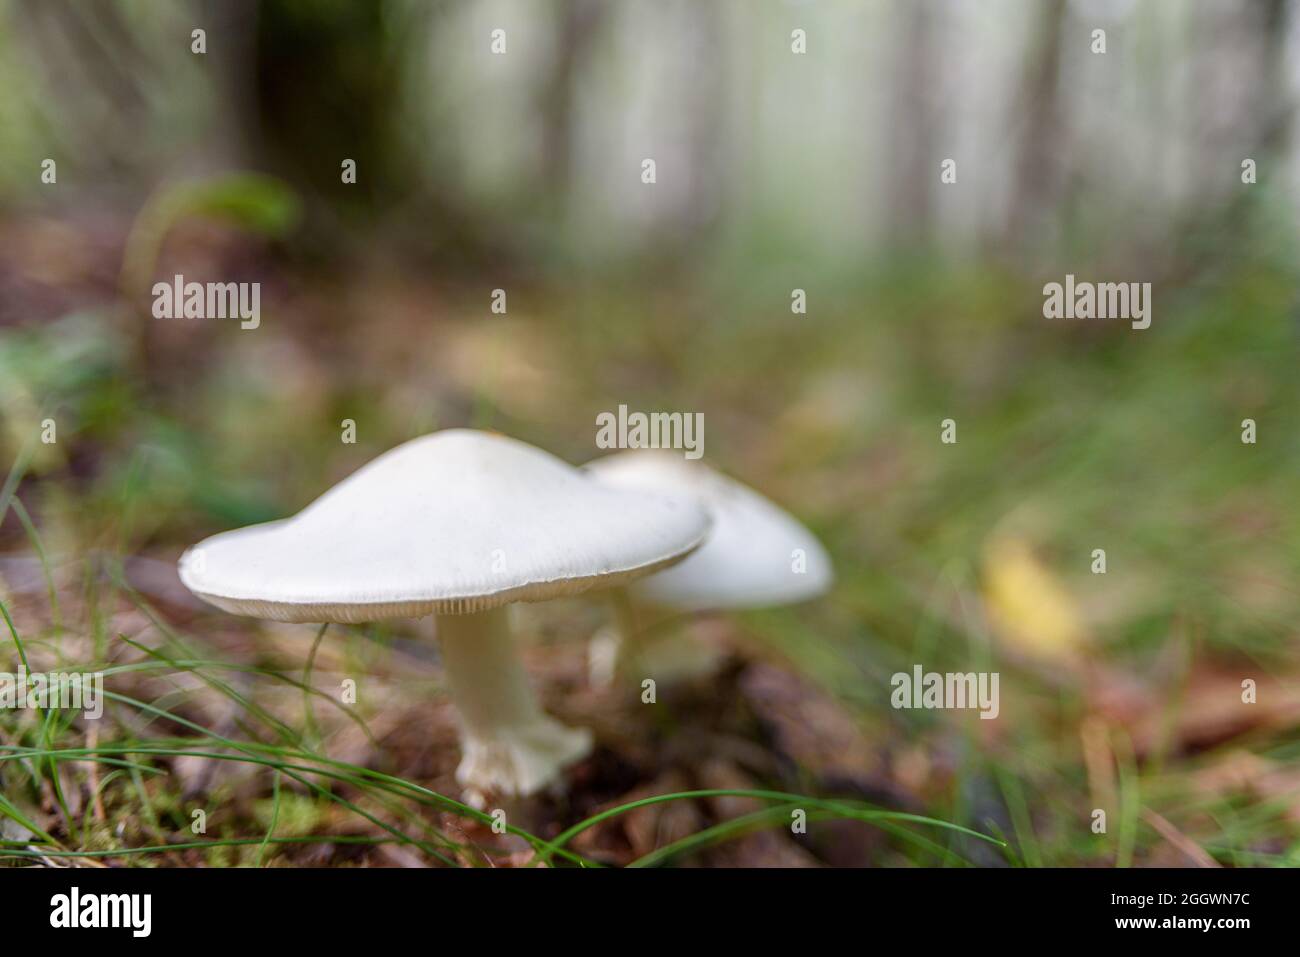 Non-edible white mushrooms in forest Stock Photo